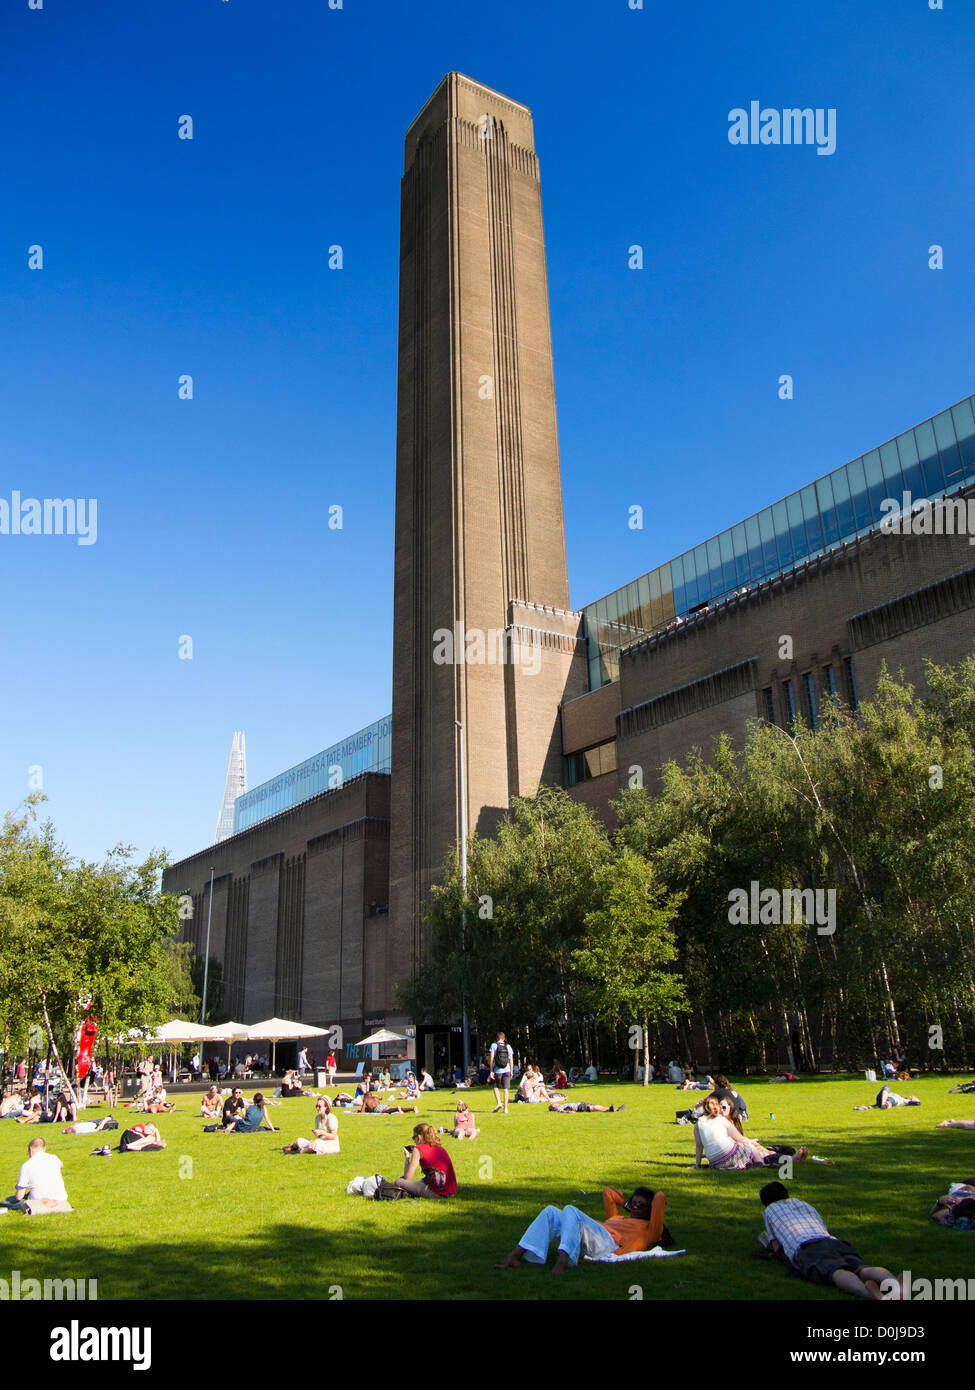 People enjoying a summer day in front of the Tate Modern gallery in London. Stock Photo